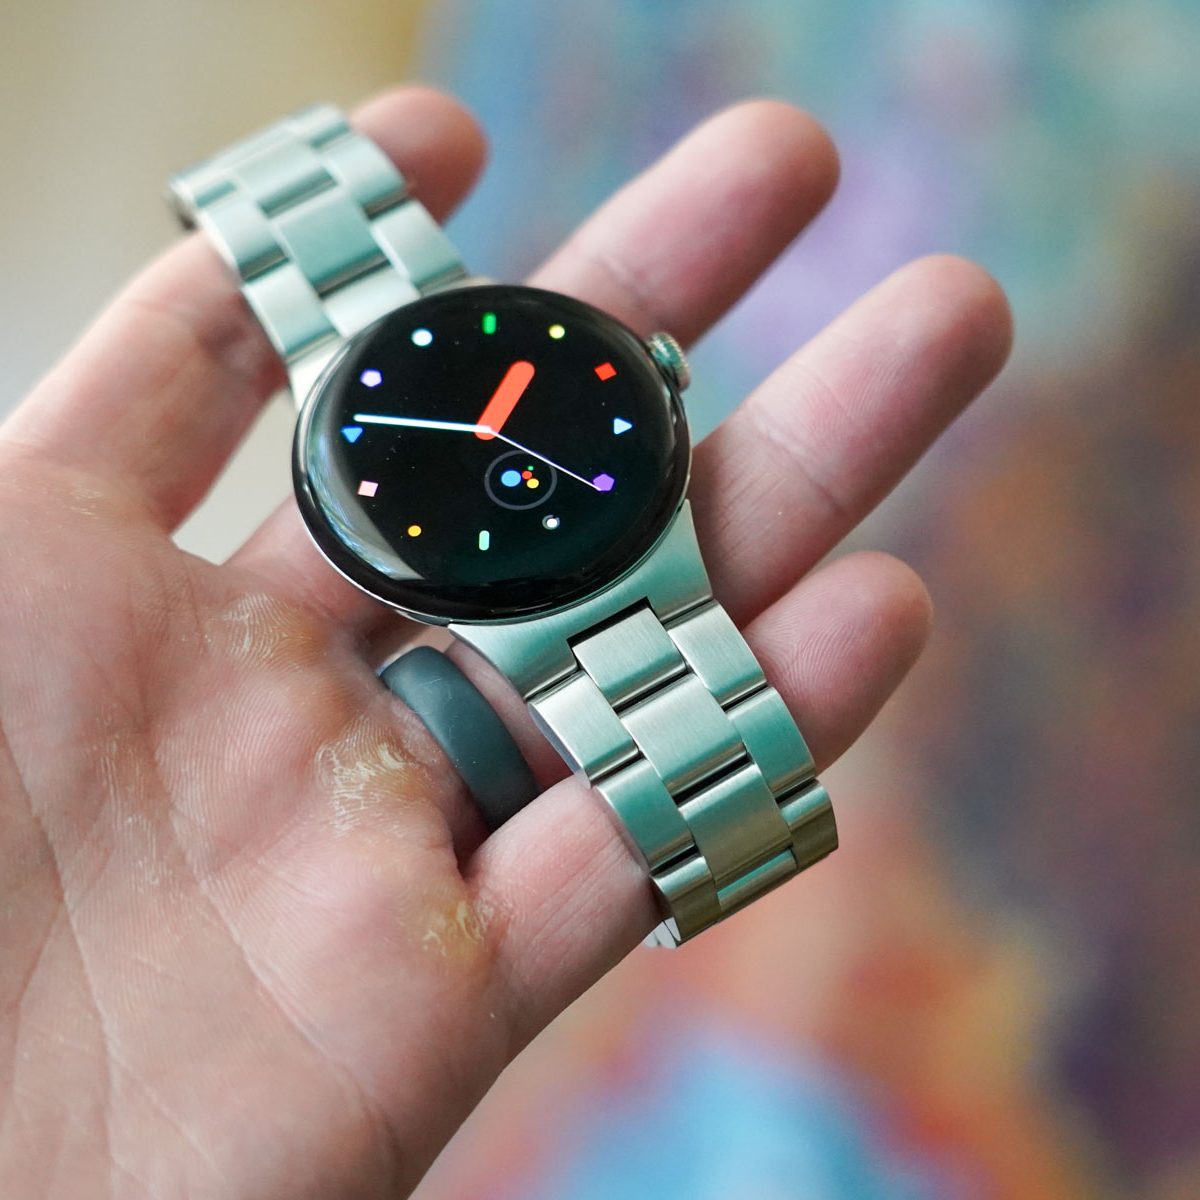 Pixel Watch 2 Gets 4 Exclusive Watch Faces - Here's What They Look Like